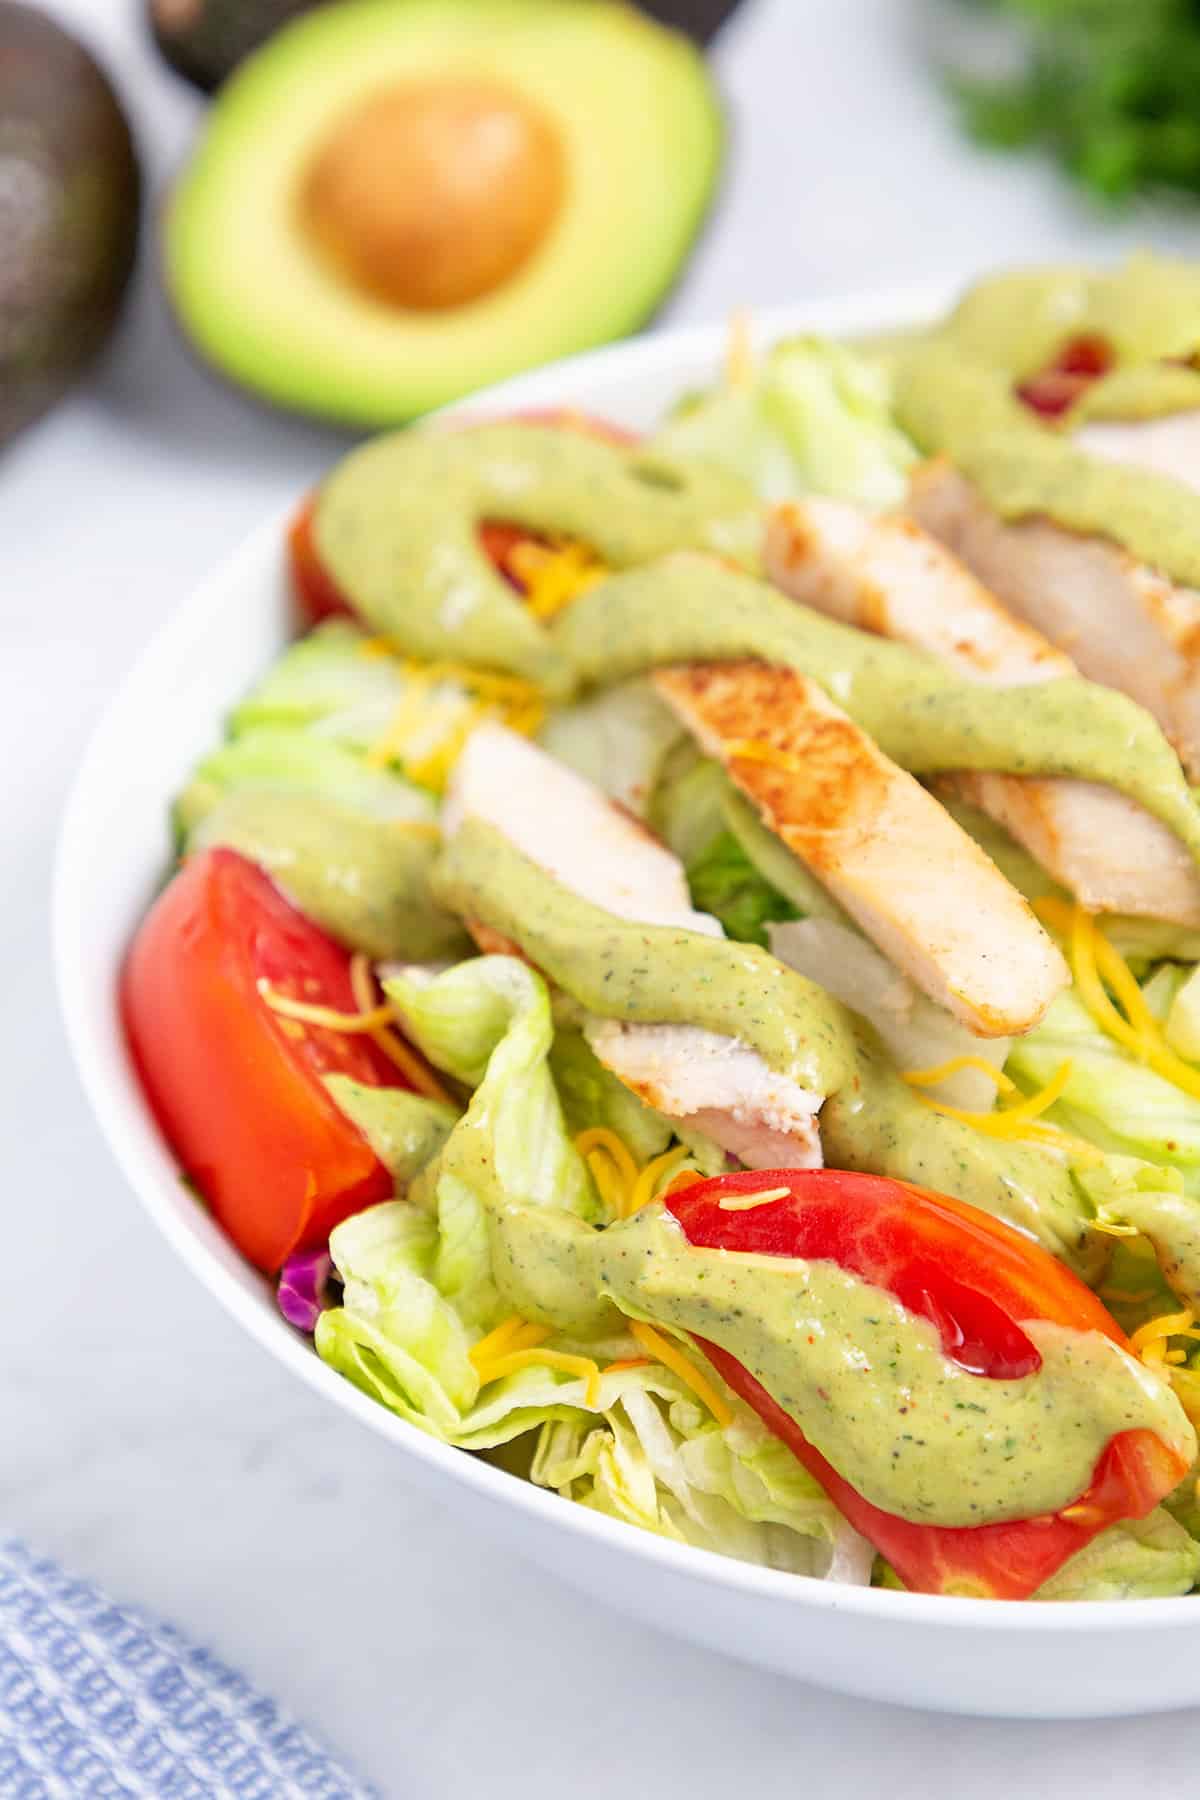 Salad topped with avocado ranch dressing.